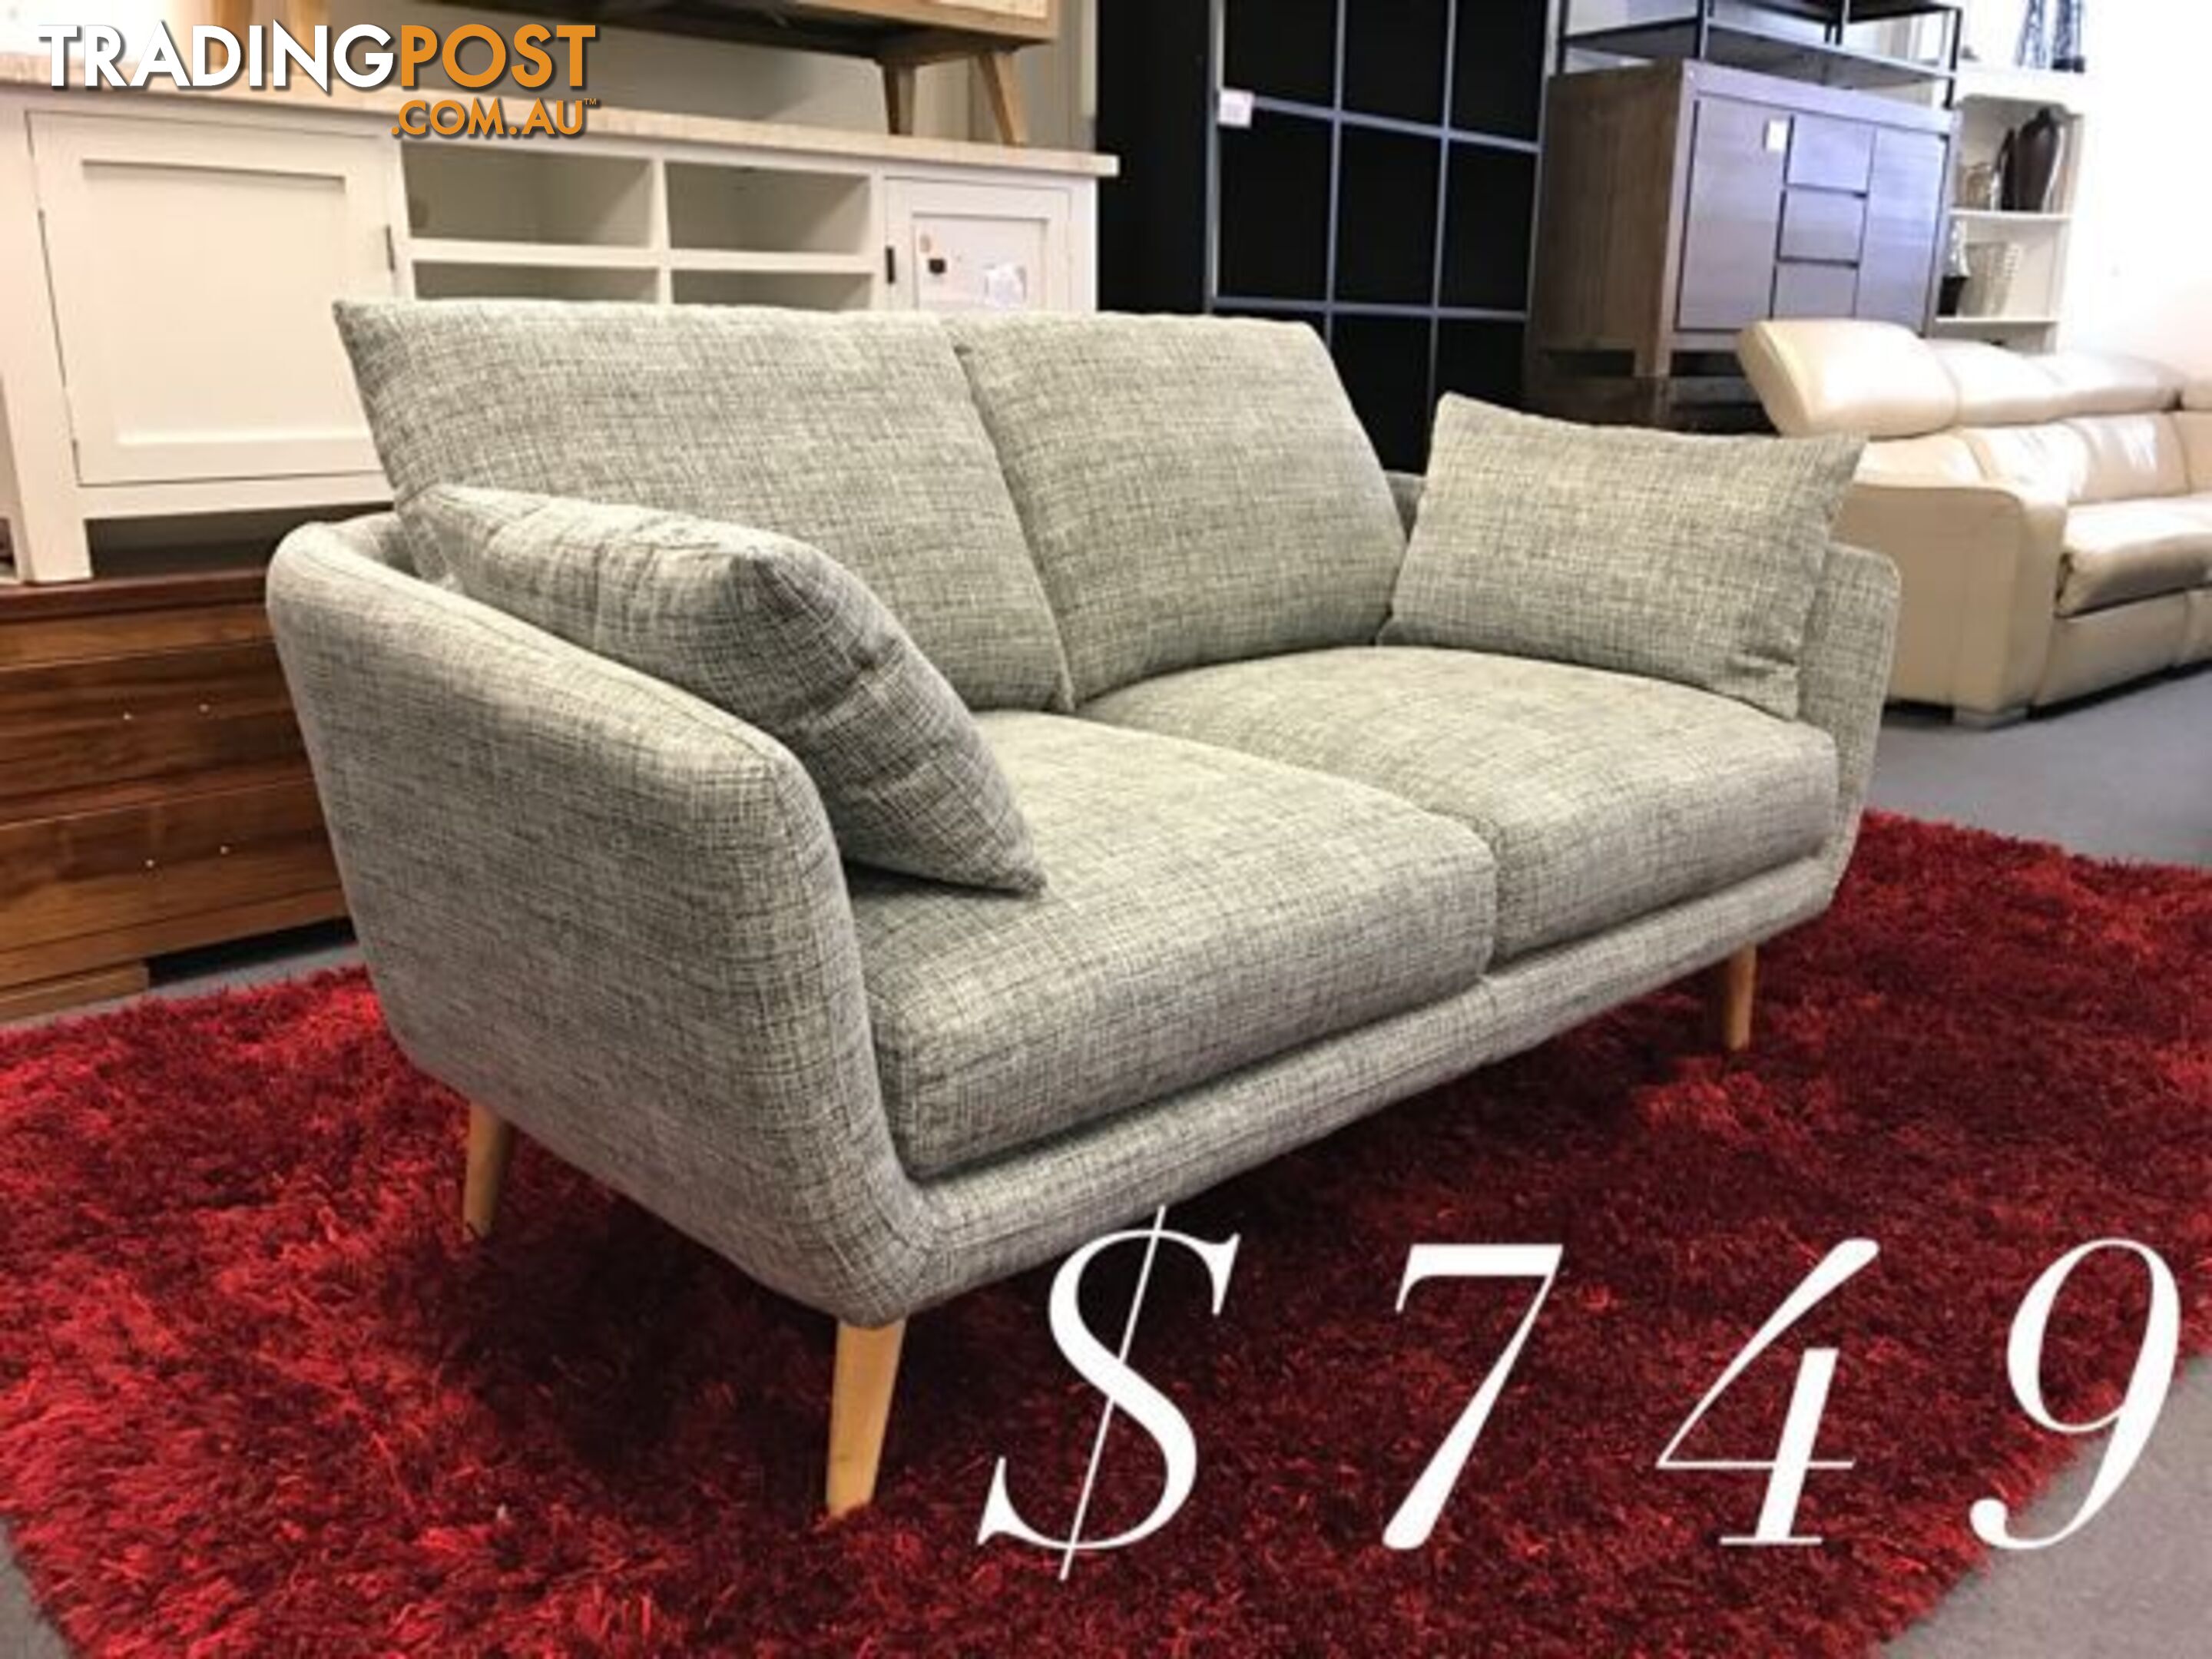 BRAND NEW SOFAS ON SALE - 70% OFF RETAIL STORE PRICES, BE QUICK!